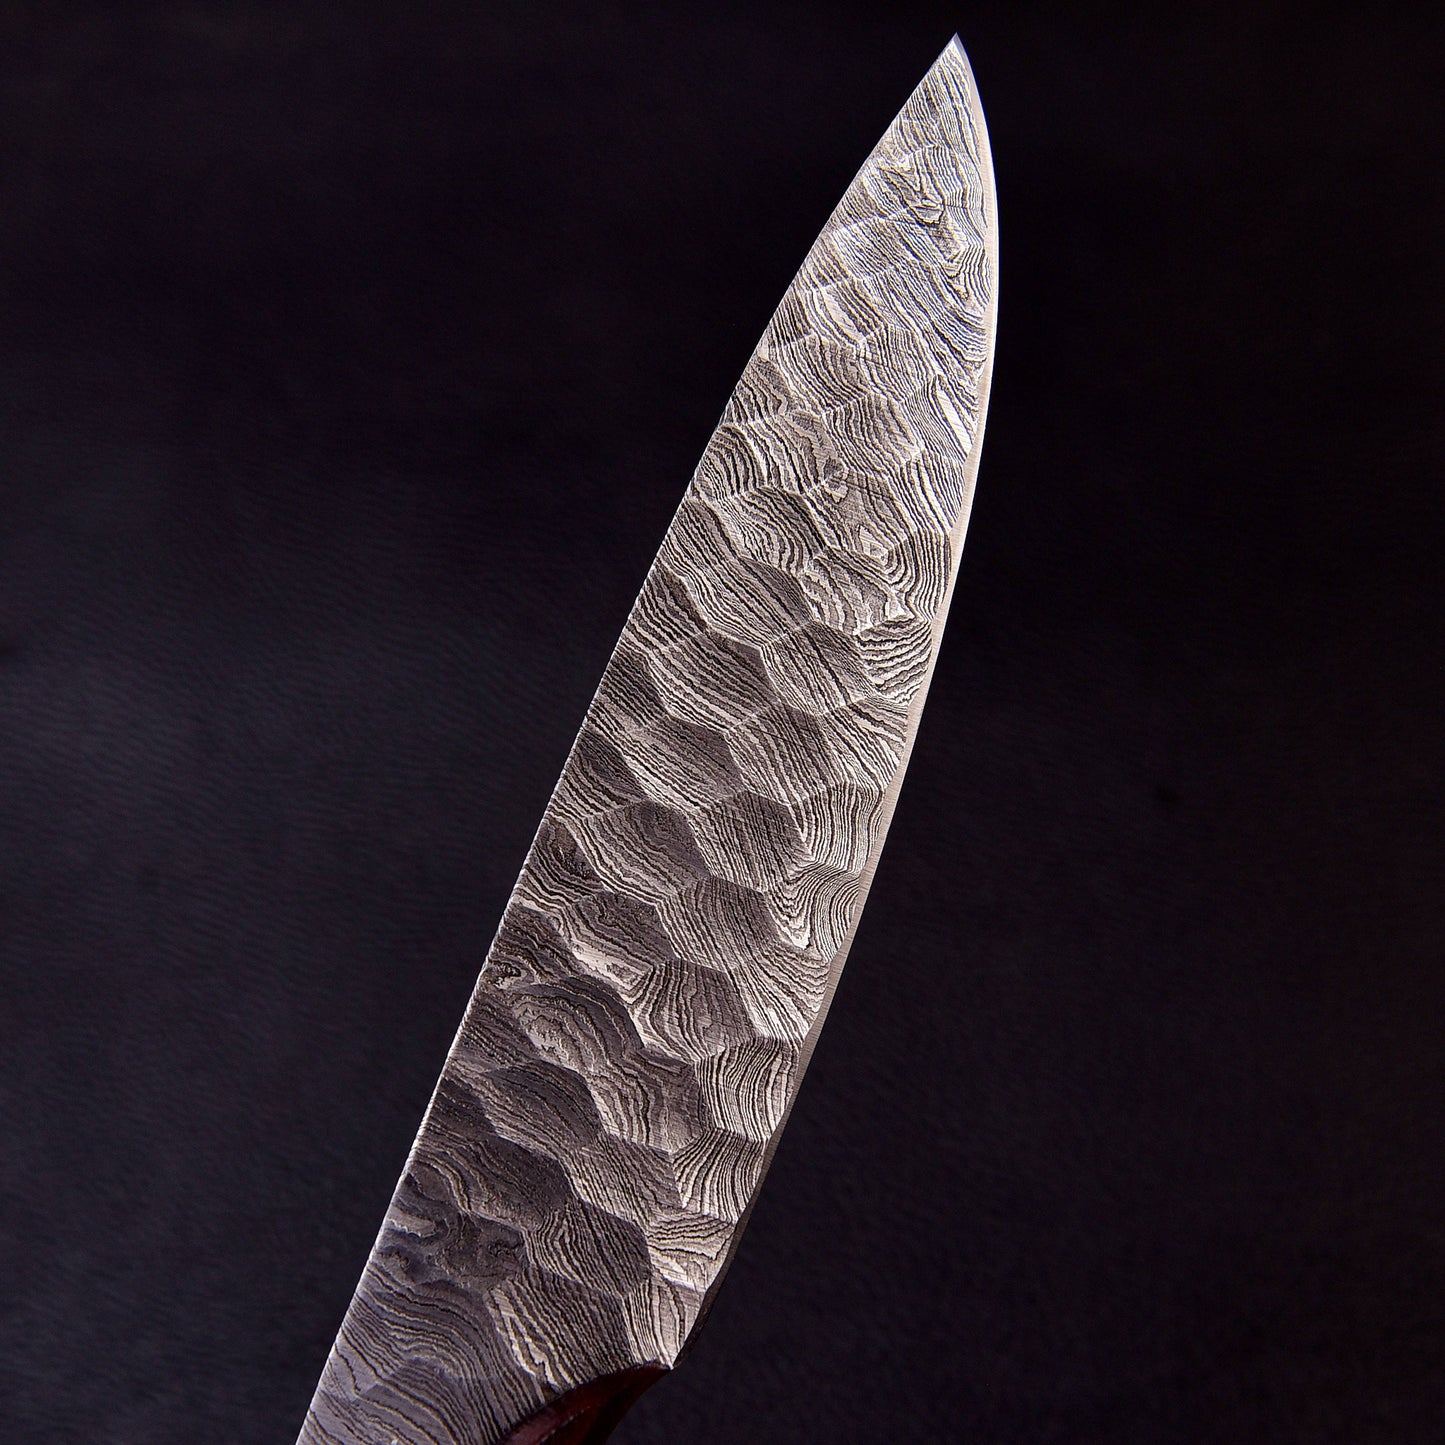 12" Ridged Unique Handle Damascus Steel Bowie Knife - Hunting or Camping Fixed Blade Full-Tang Drop Point Handmade Bowie Gift for Him